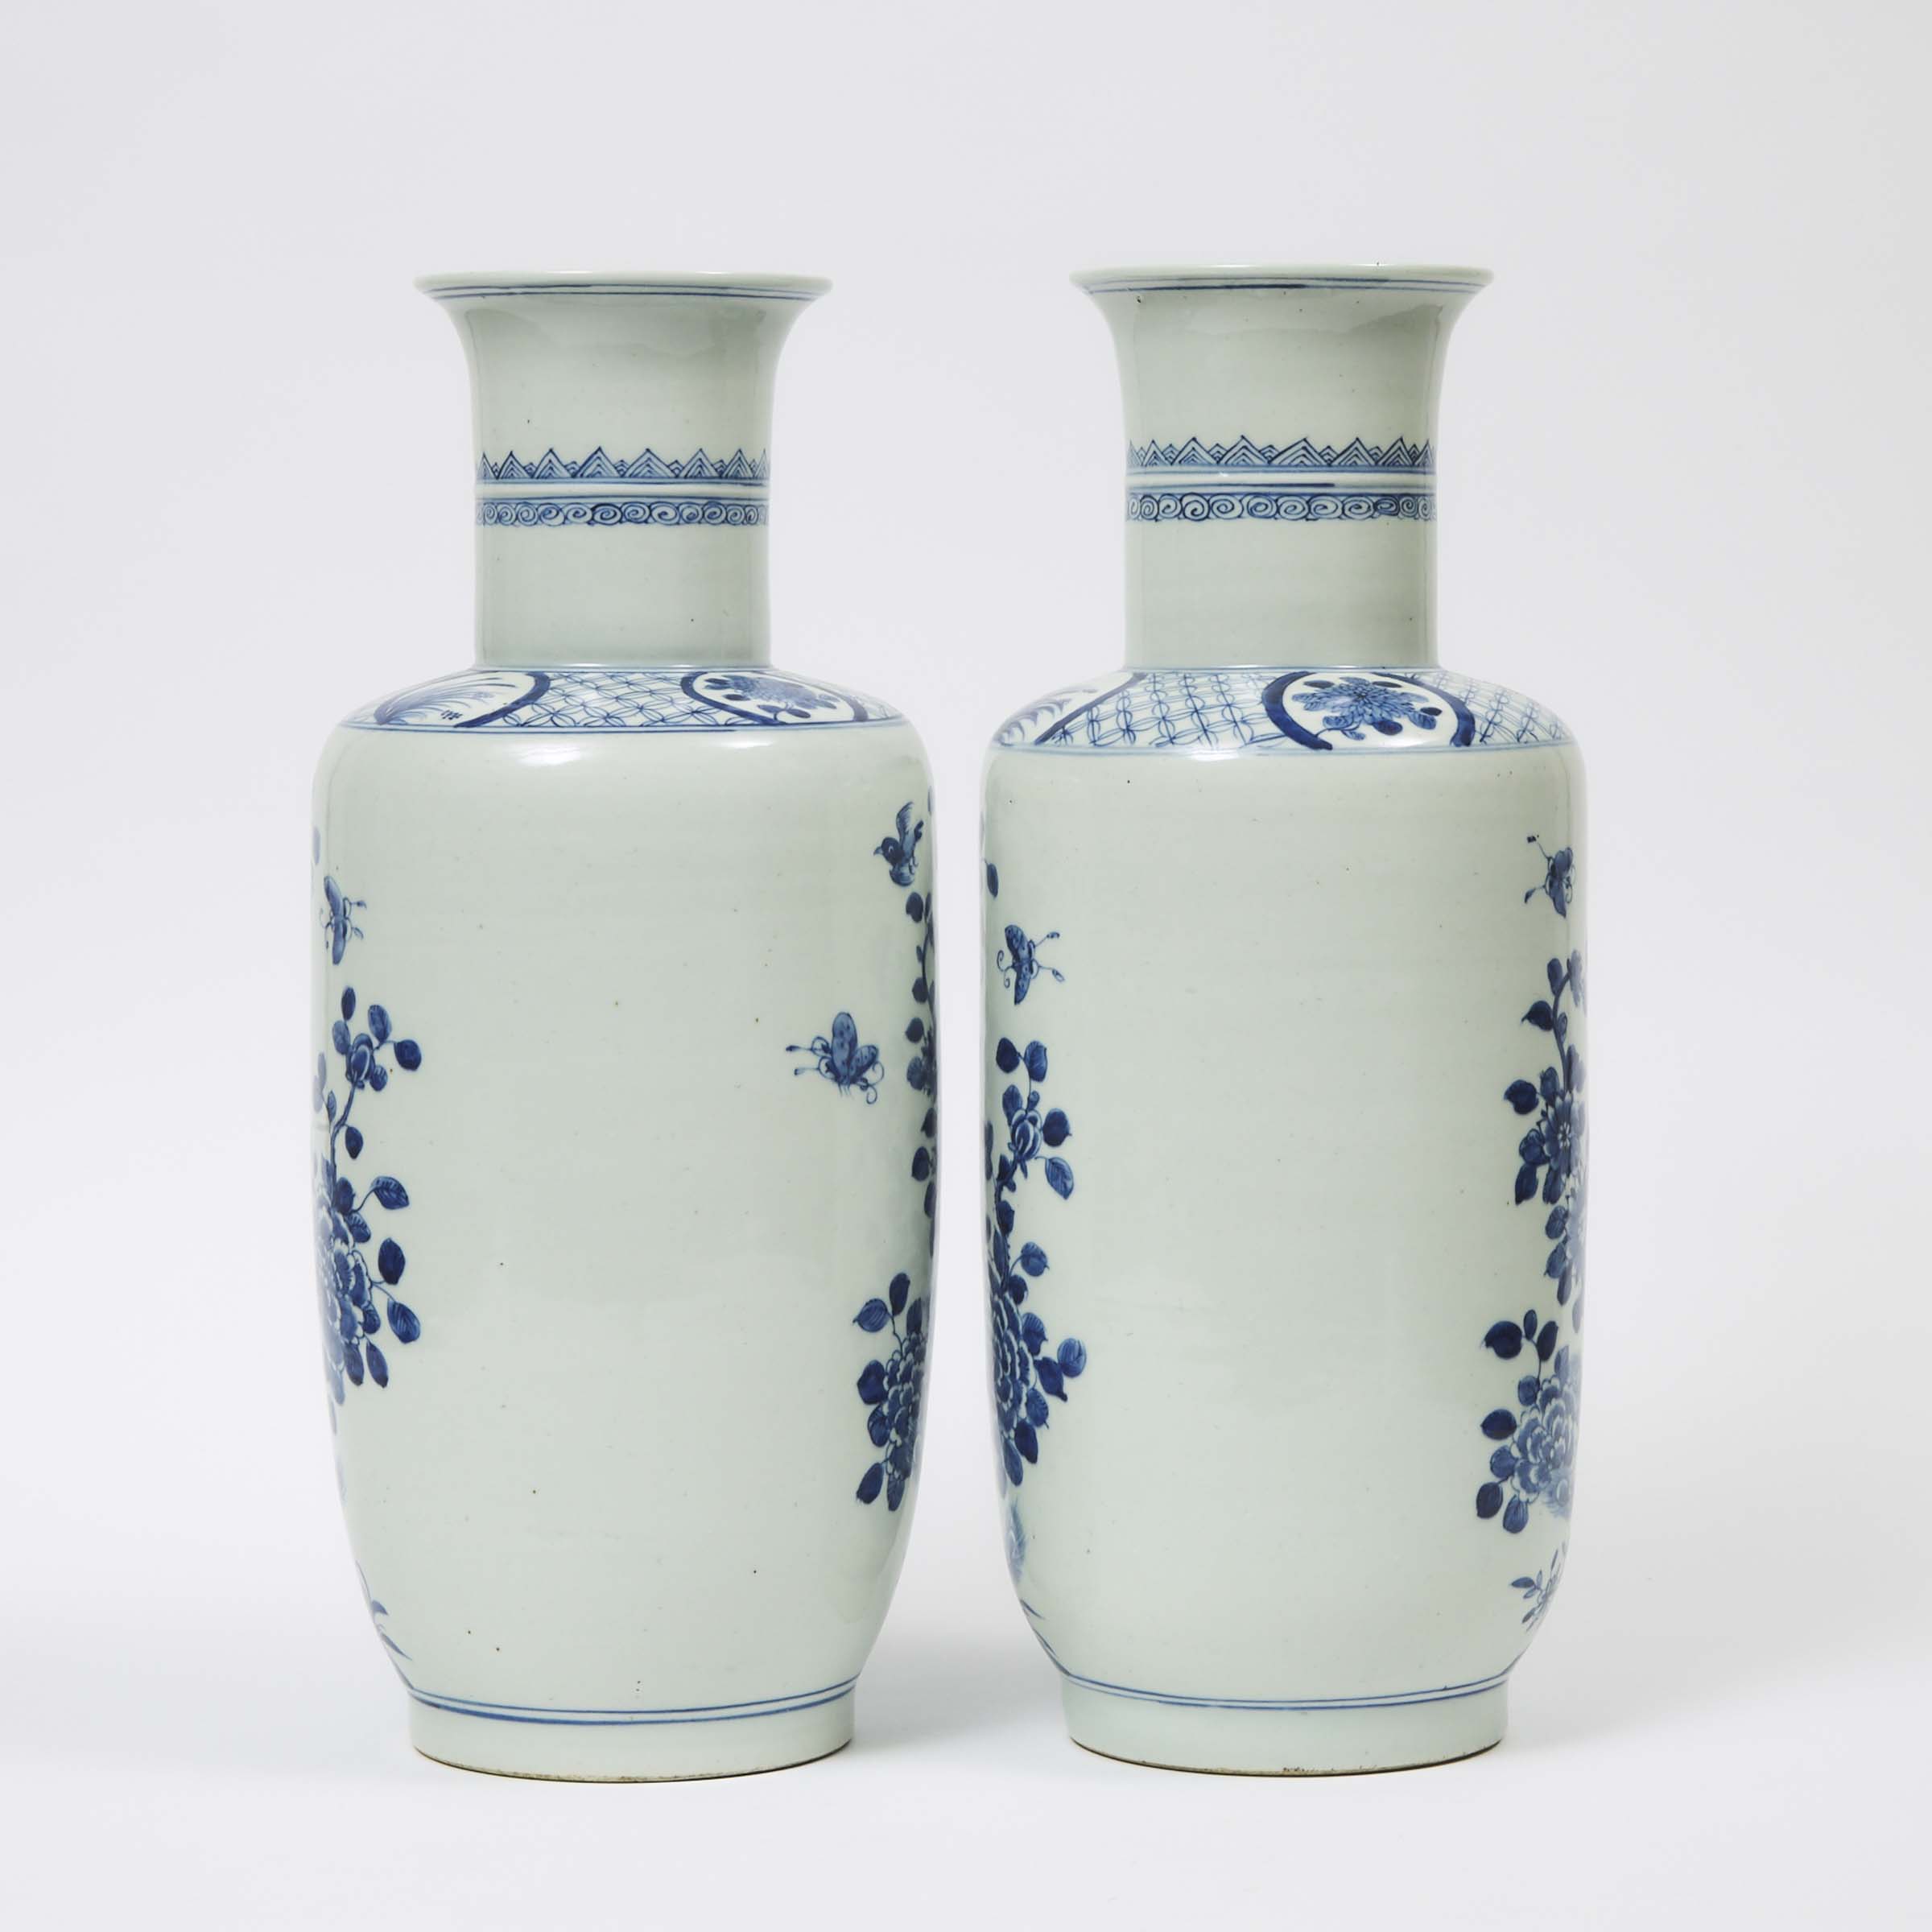 A Pair of Blue and White 'Phoenix' Rouleau Vases, Qing Dynasty